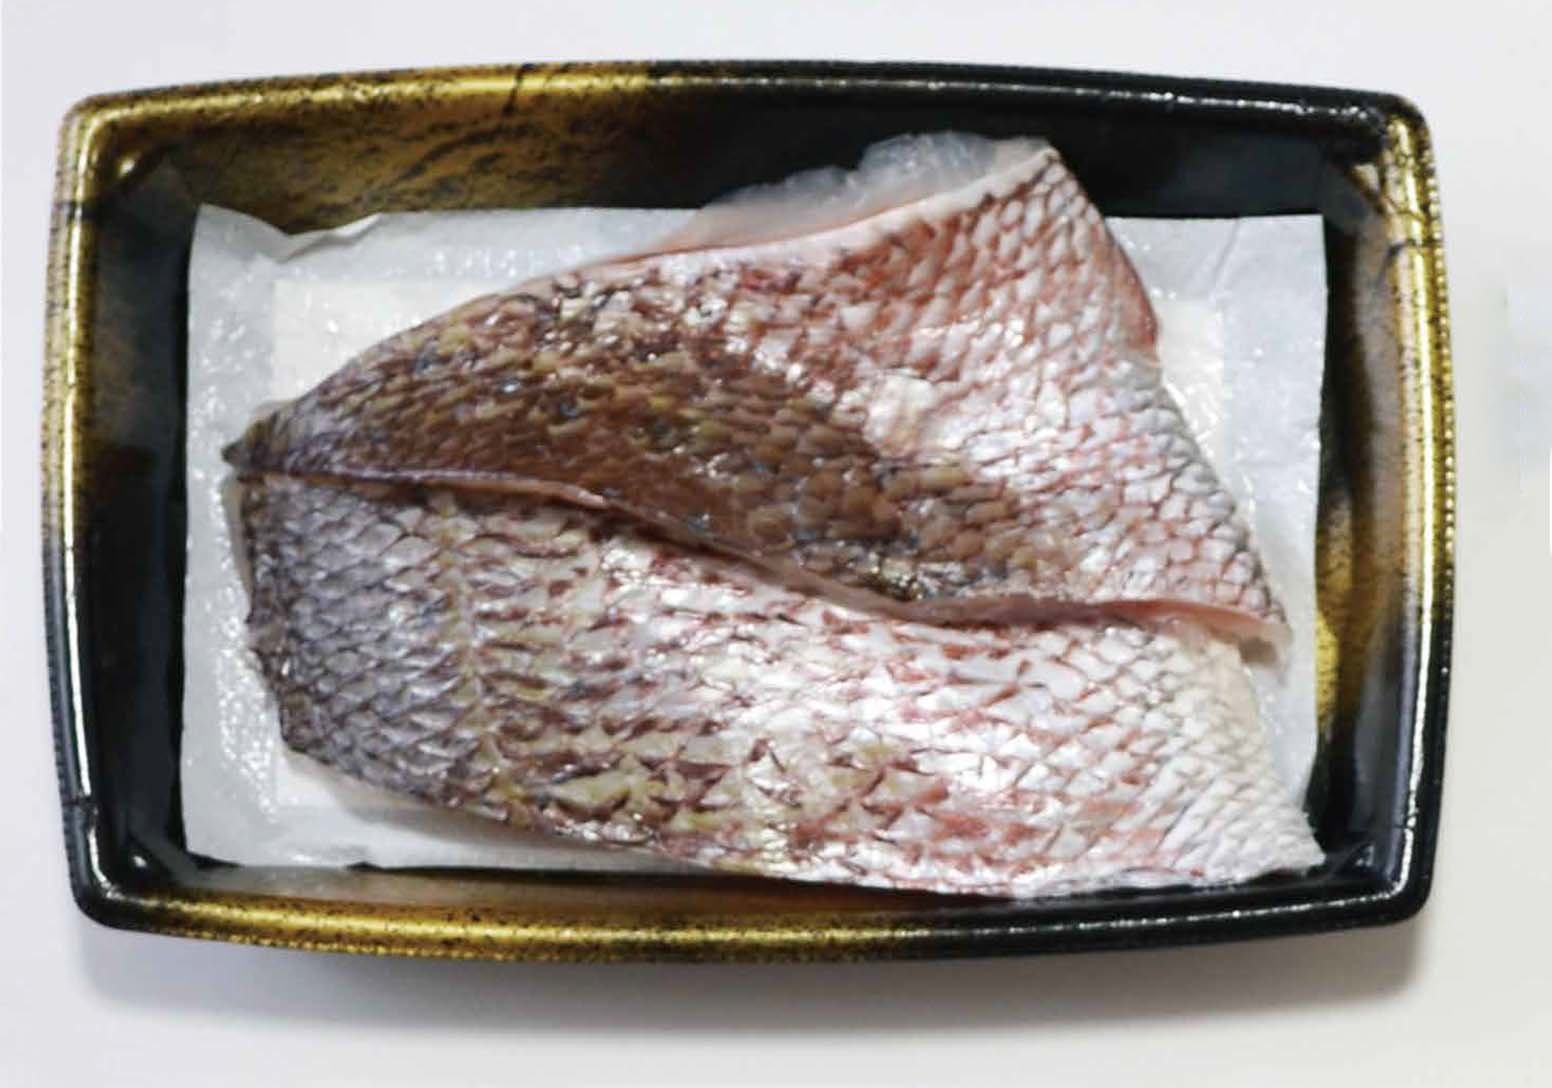 Demi design absorbent food pad to absorb excess moisture for cut fish fillets